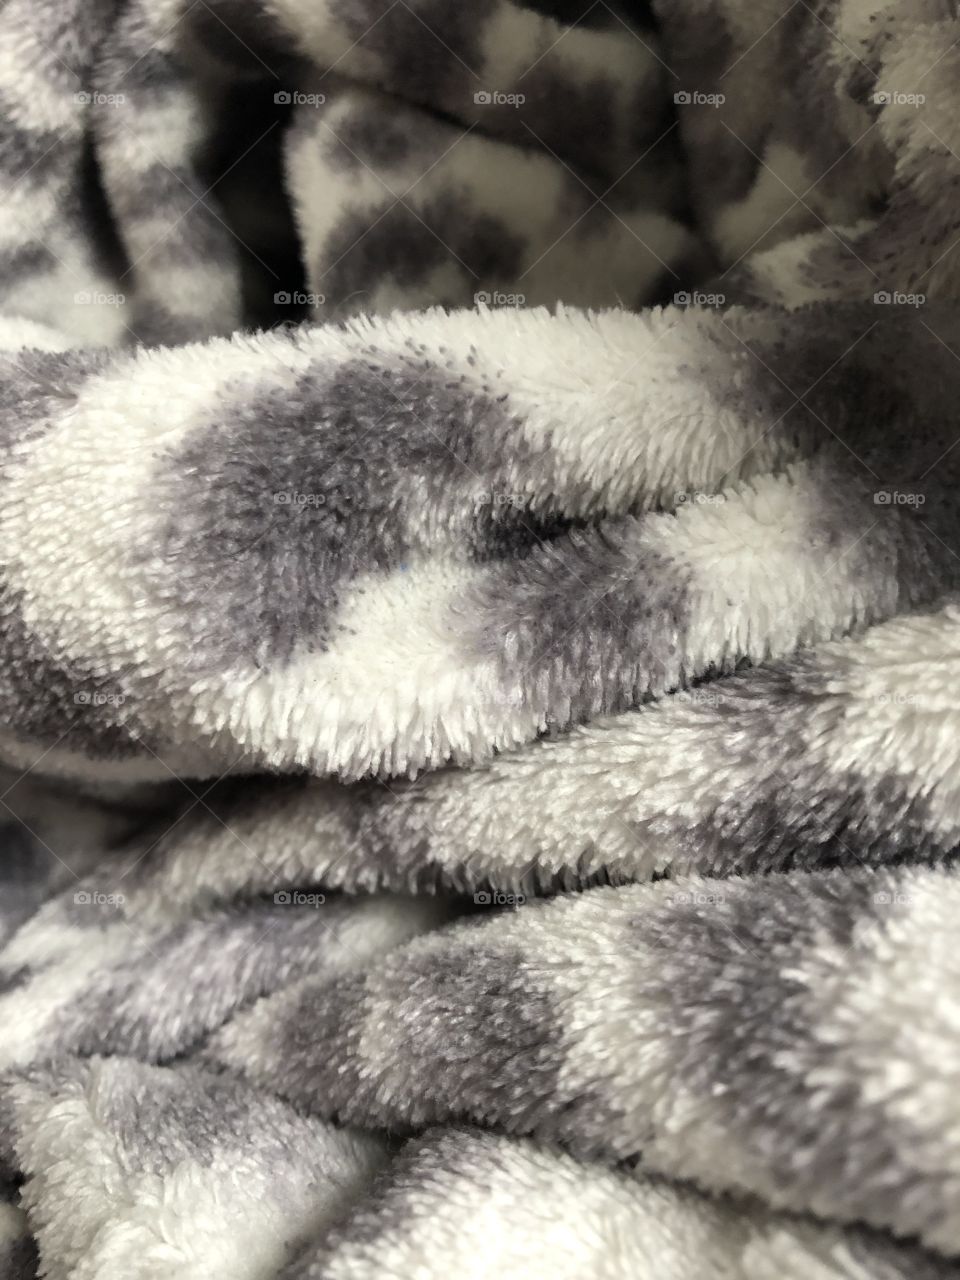 This comfortable, fluffy blanket has been bunched up to create an interesting pattern.